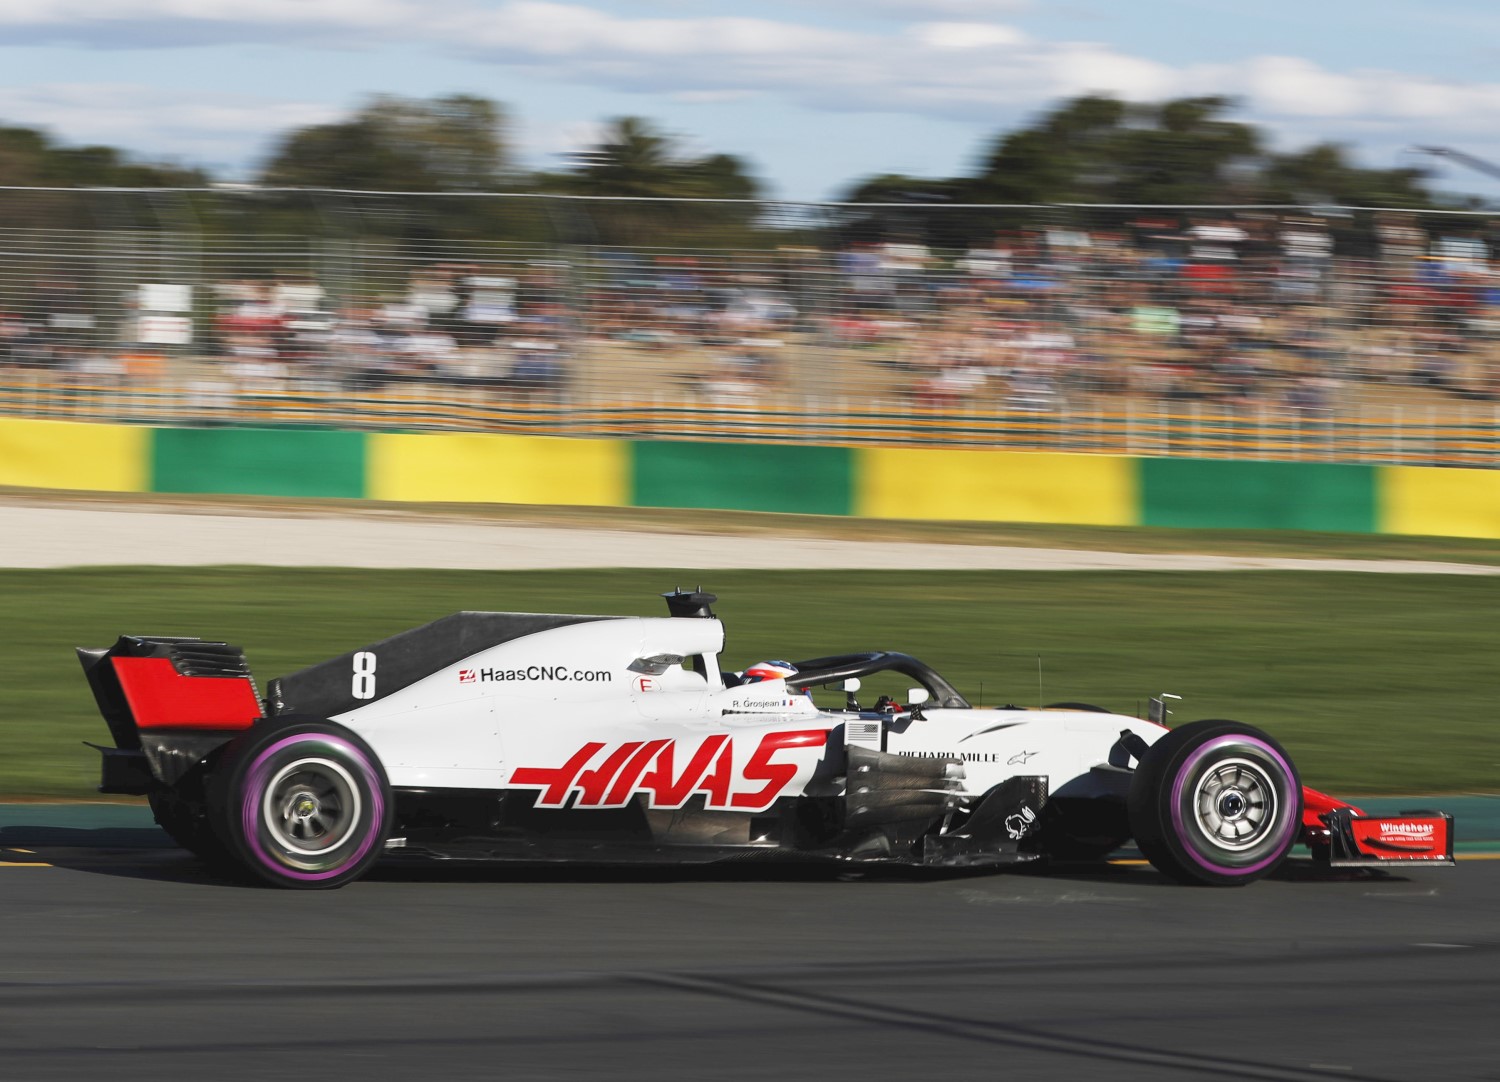 One test in the Haas car will cost as much as a half season in IndyCar. Talk about a waste of money